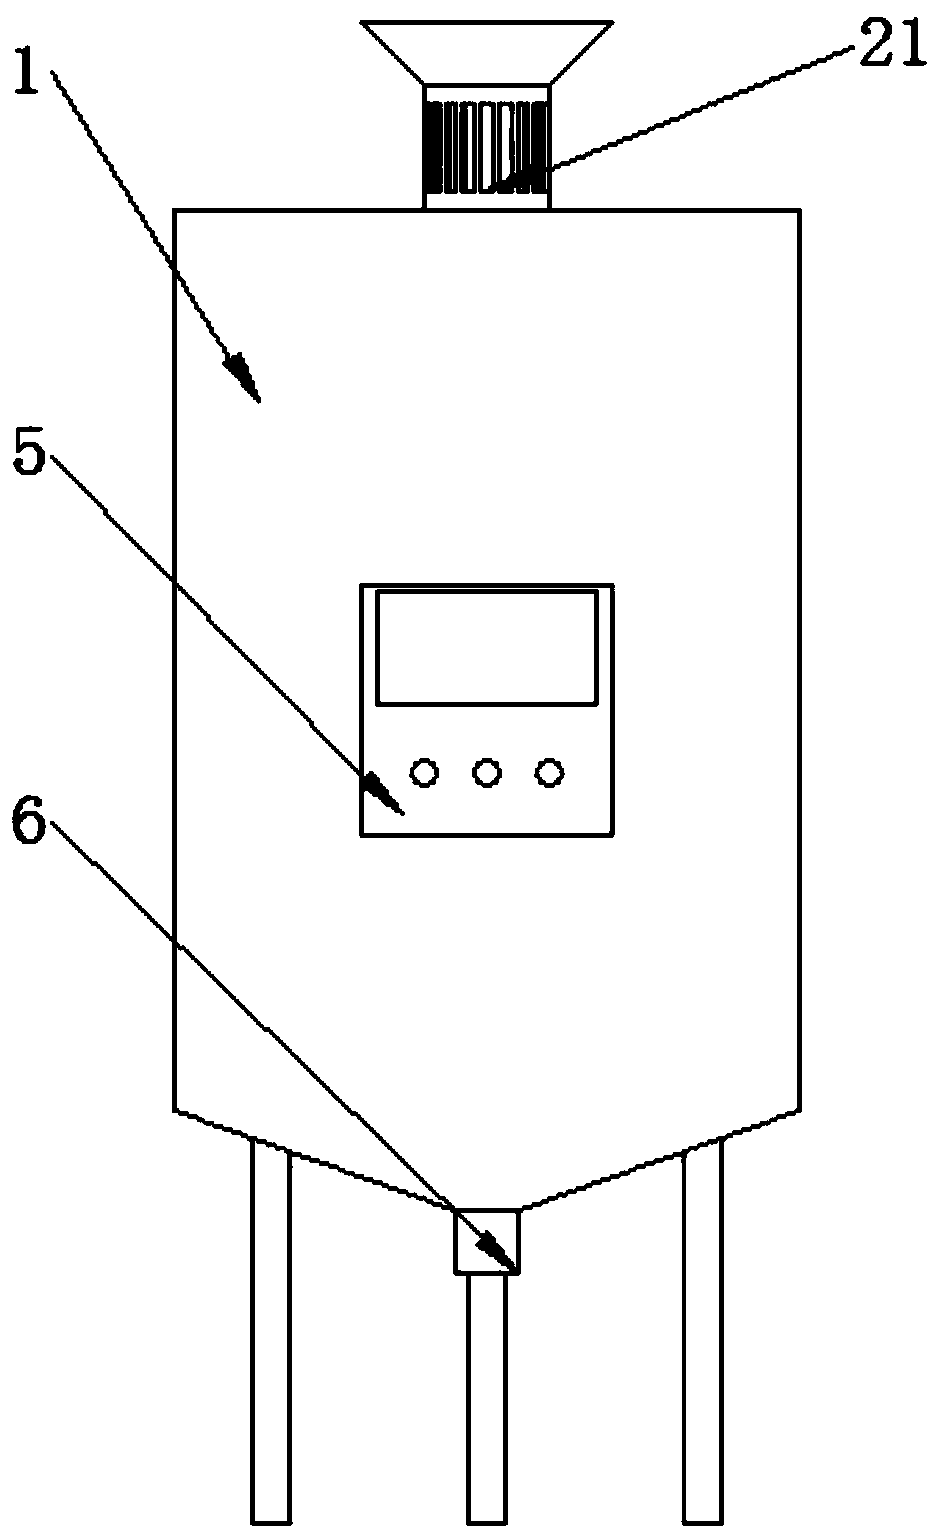 Operating method of activation container stirring tank for coal mines